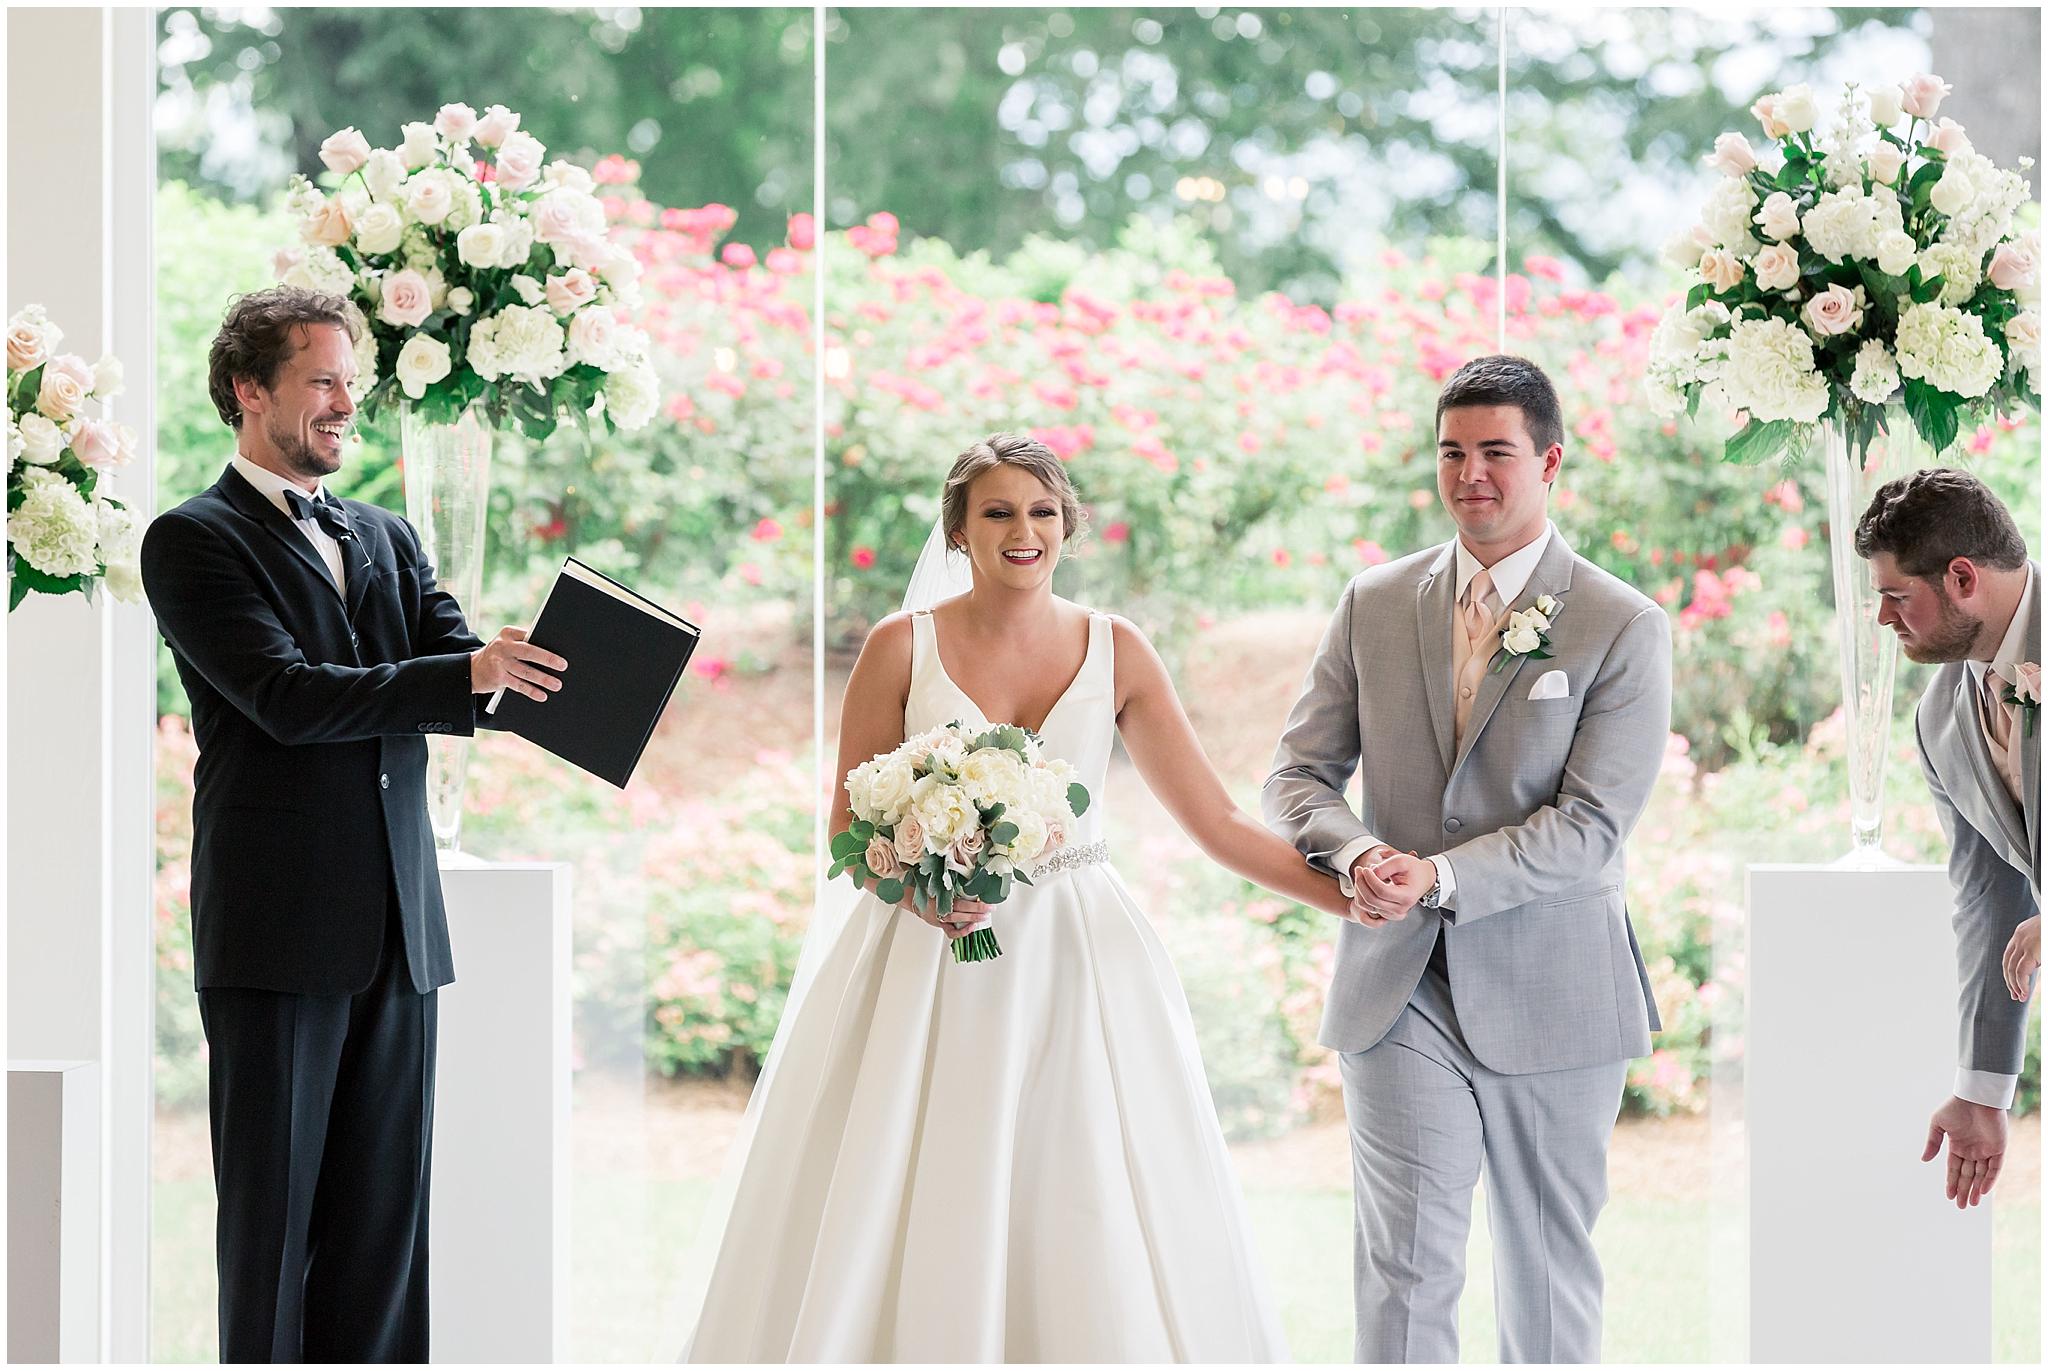 Tate House Wedding Ceremony Pictures